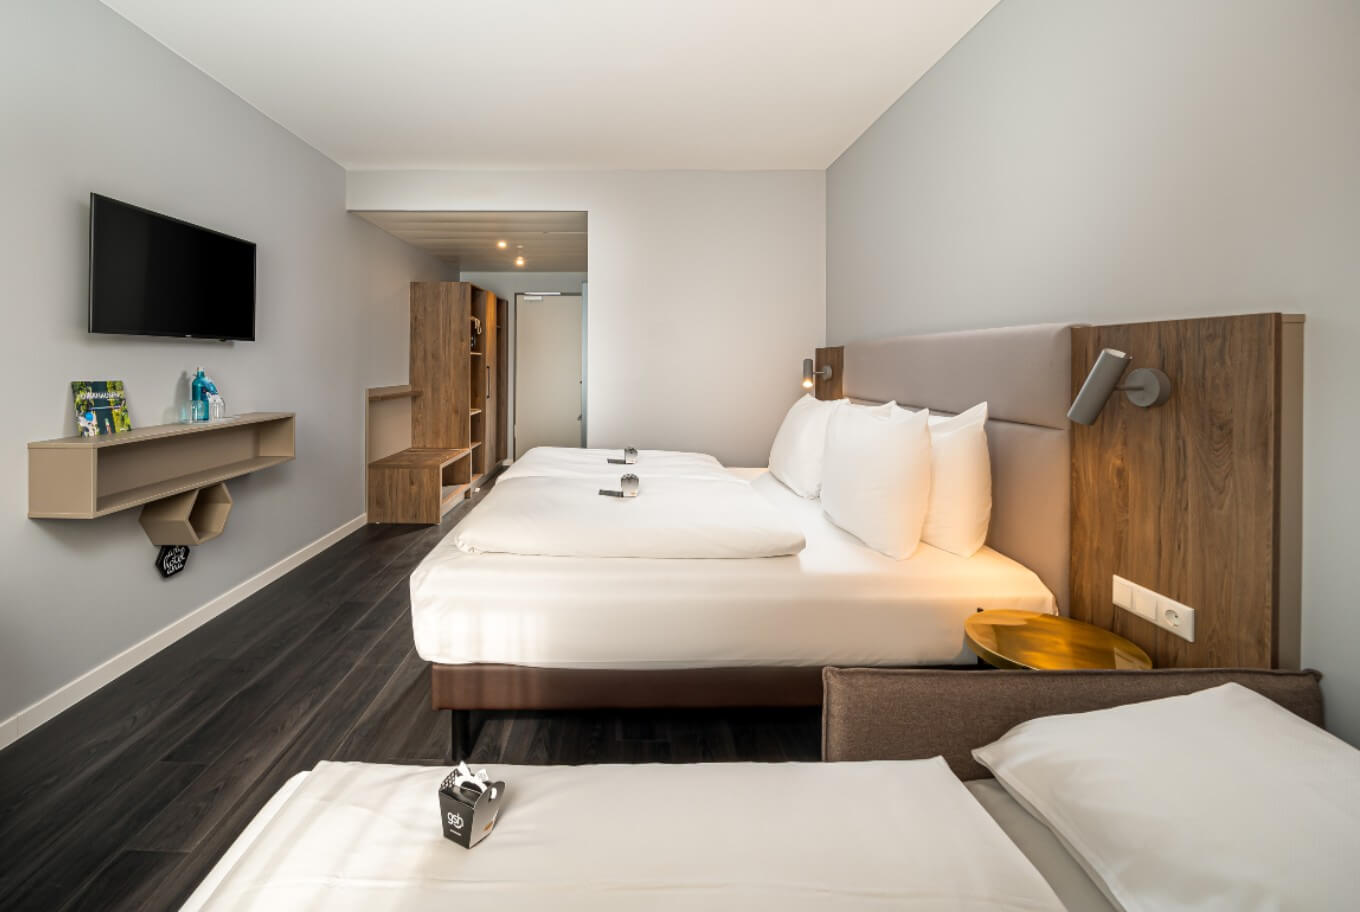 Three of you on the road? No problem, our Arthotel ANA Soul has room for all three of you.